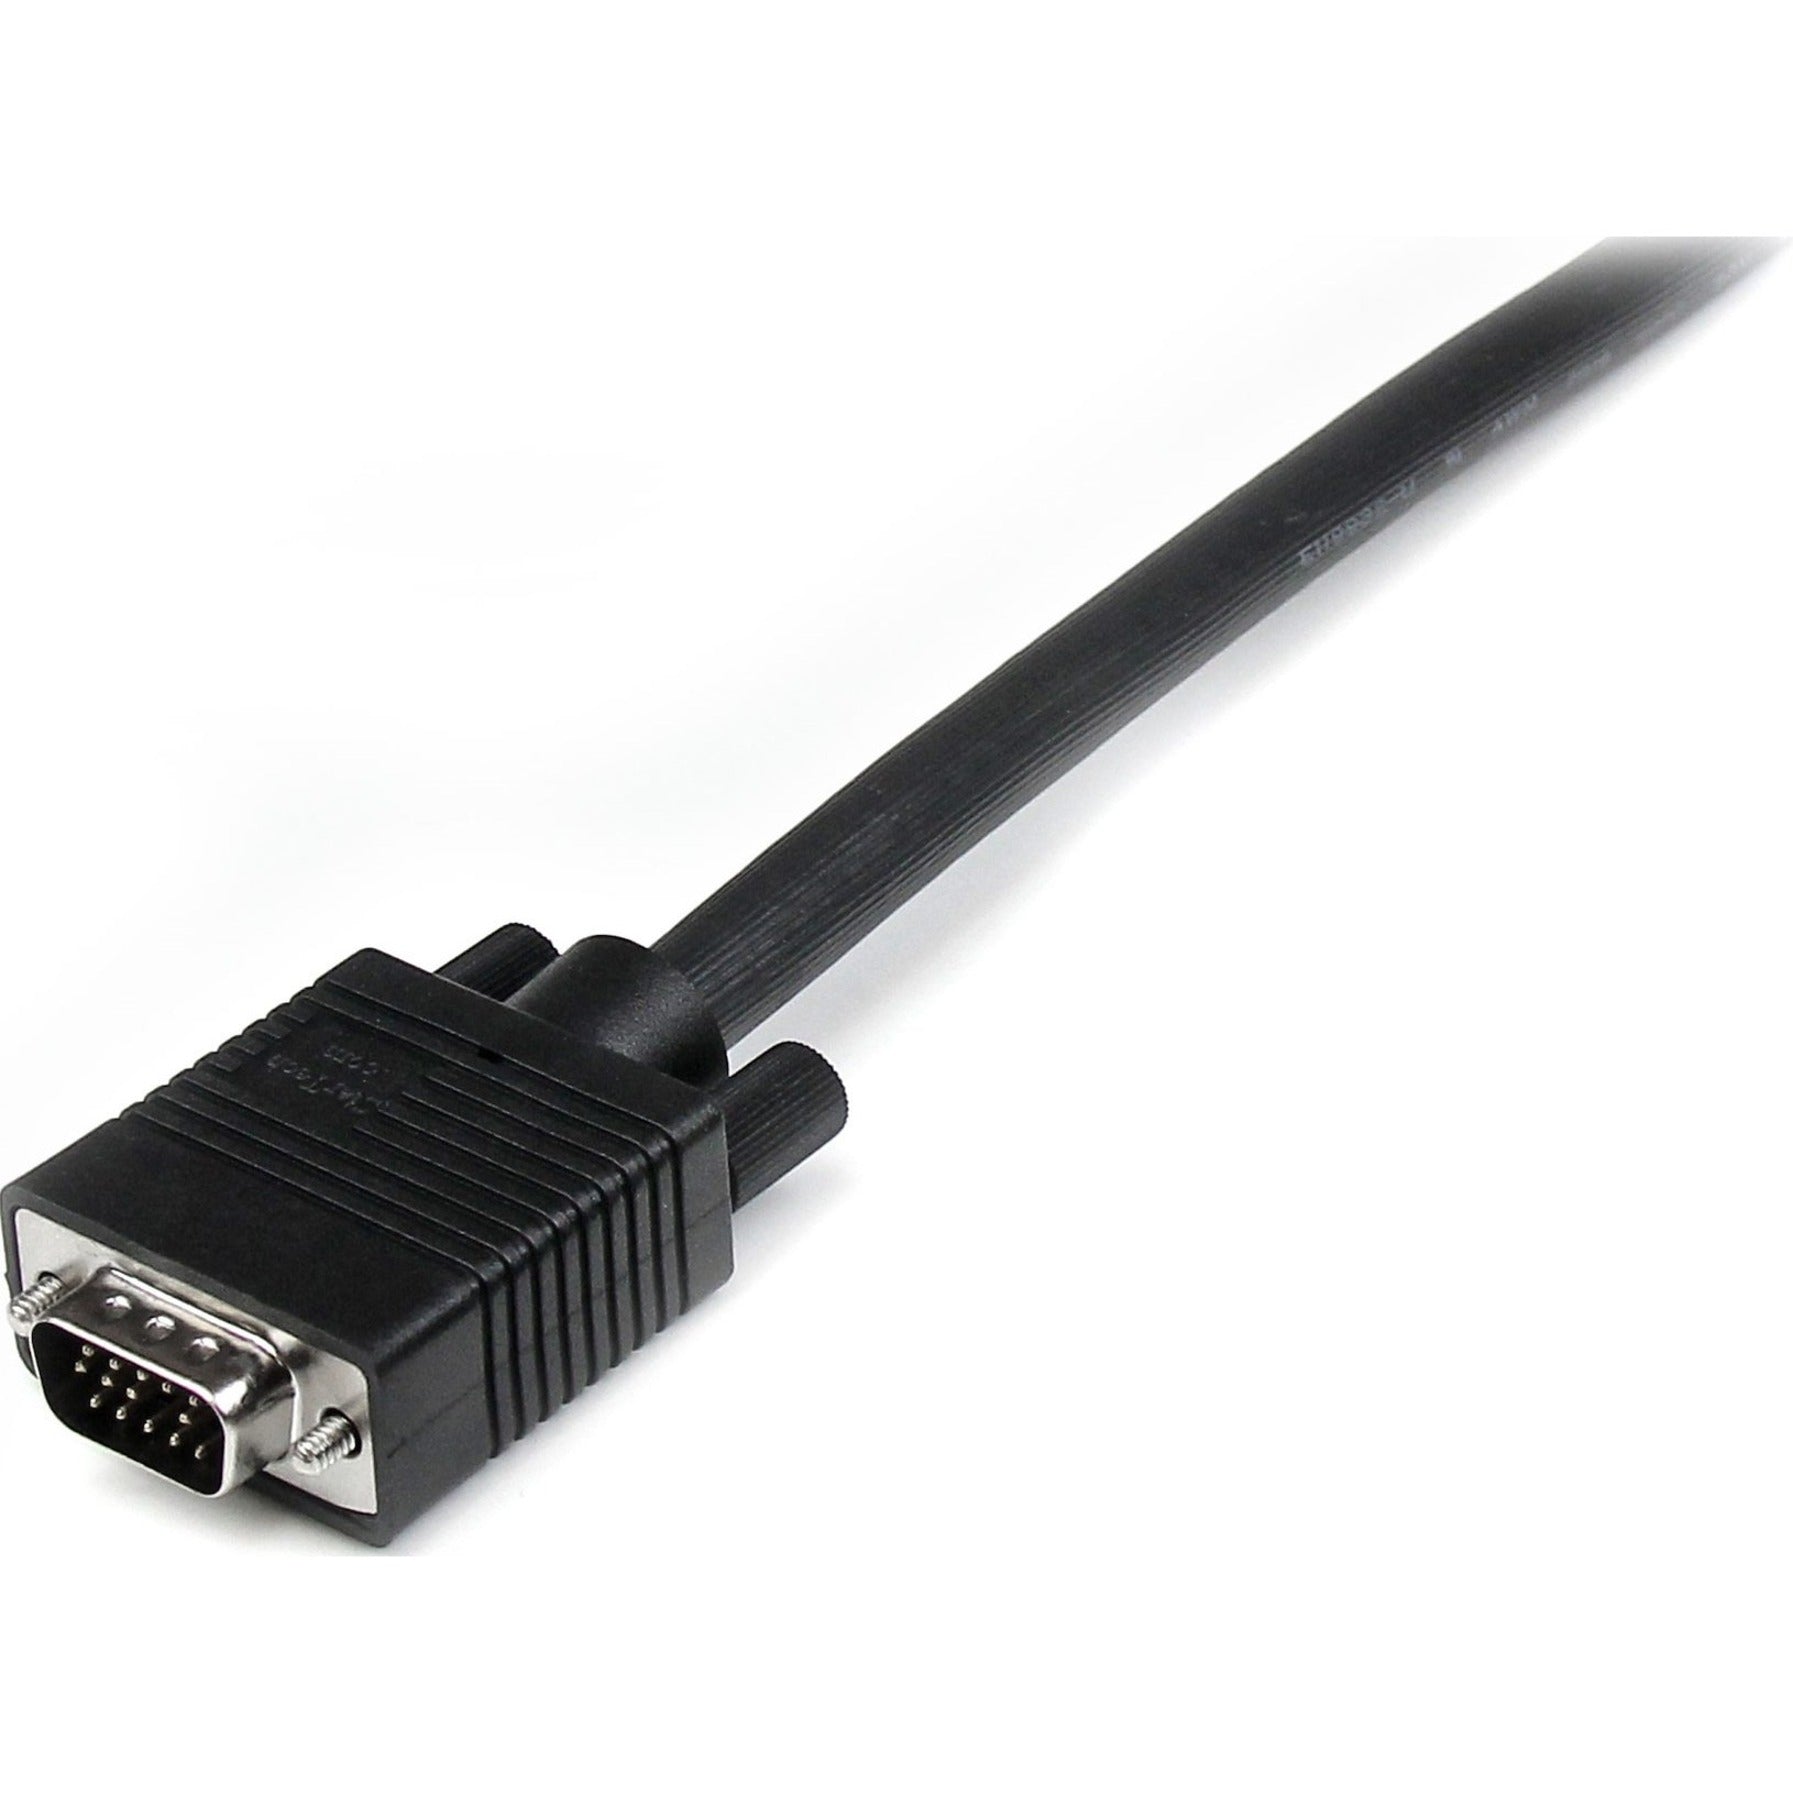 StarTech.com MXT101MMHQ50 High Resolution VGA Monitor Cable, 50ft Coaxial, Lifetime Warranty